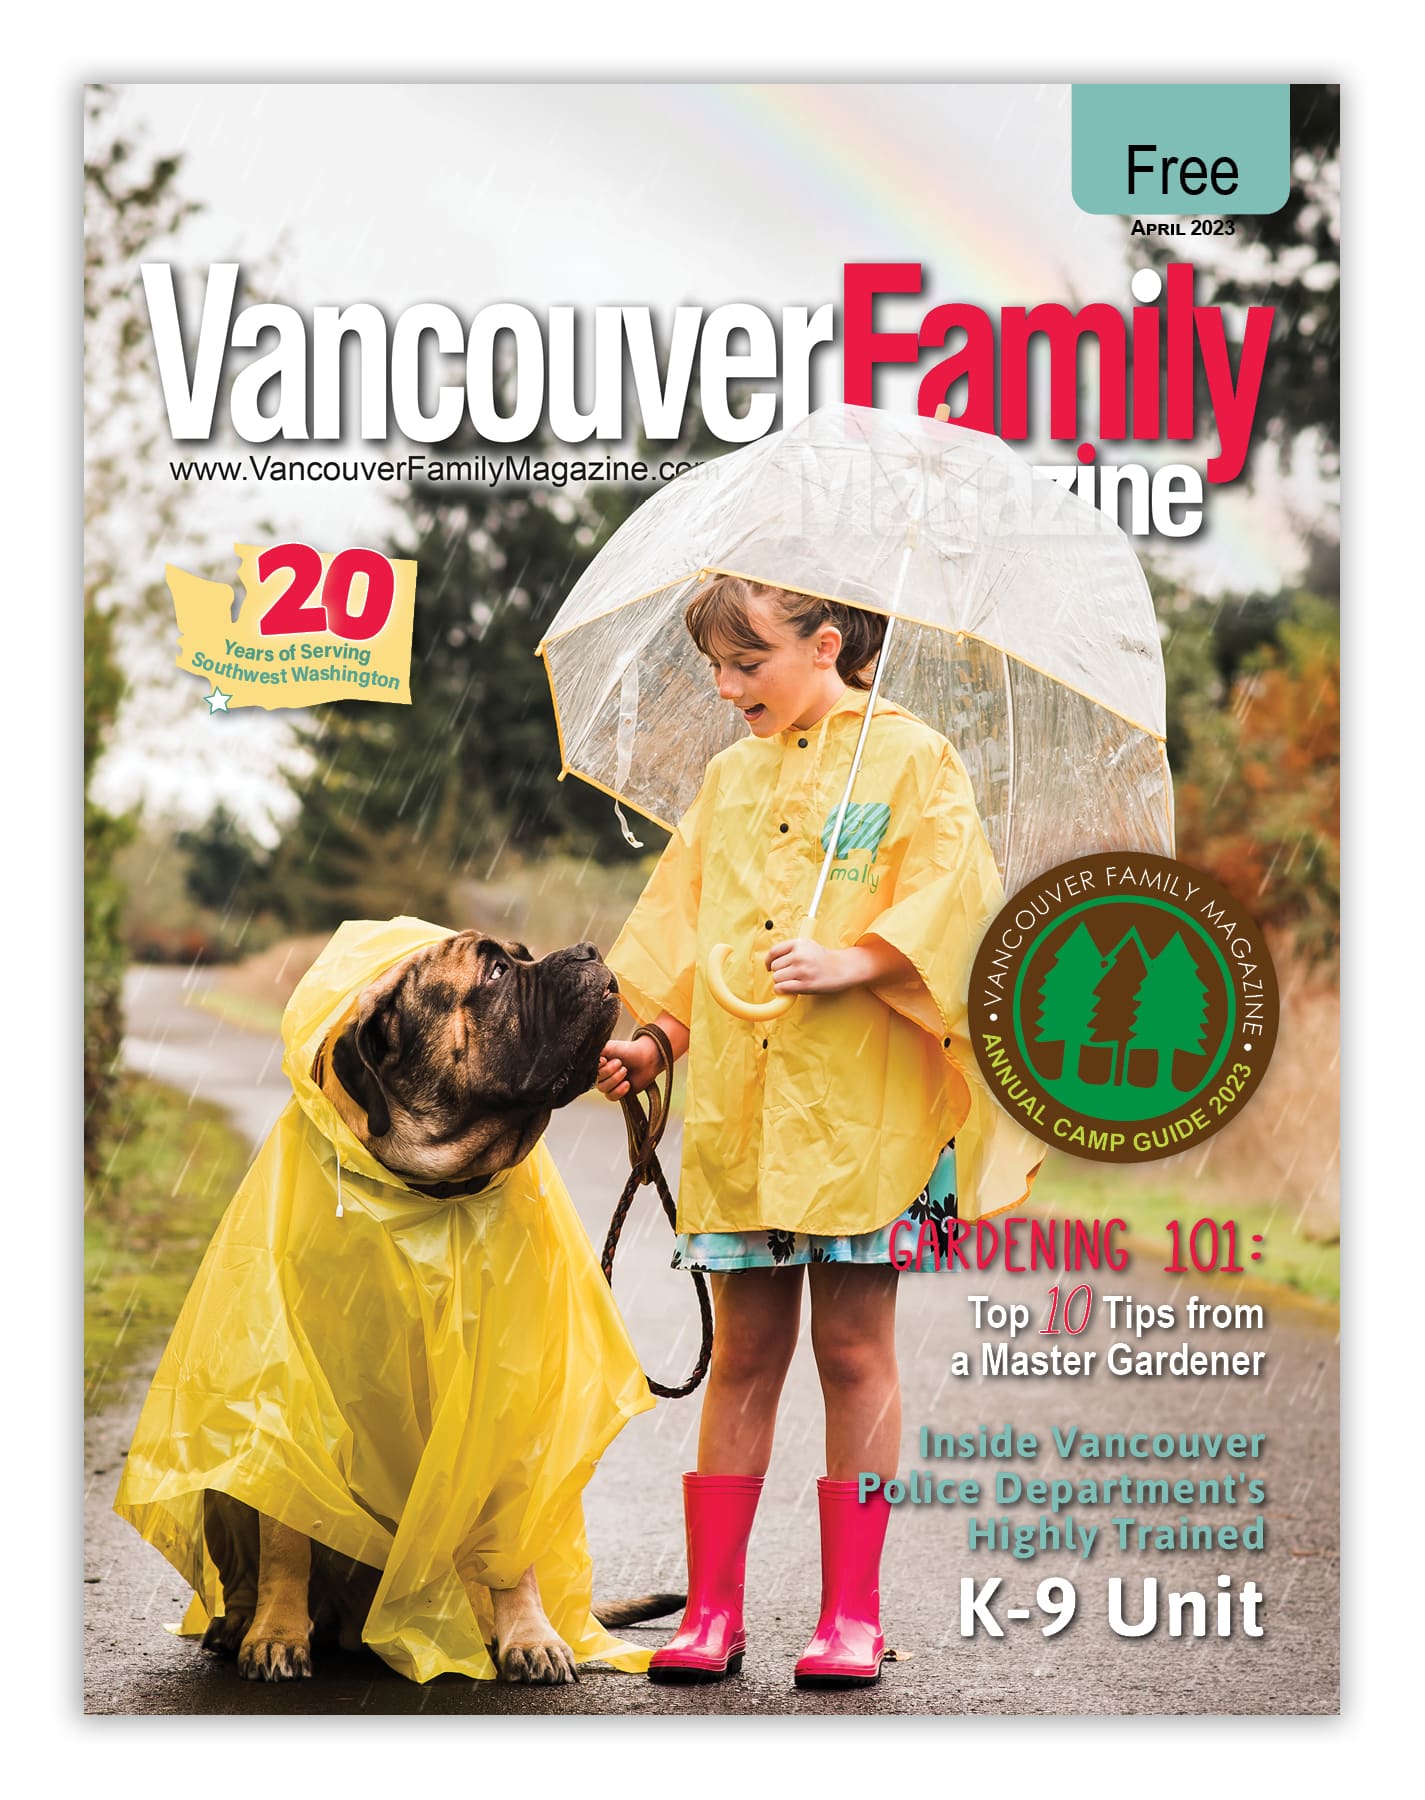 Vancouver Family Magazine's April 2023 issue cover features a girls wearing a yellow raincoat and holding an umbrella, joined by a large dog also wearing a yellow rain poncho. The girl and dog are looking at one another.